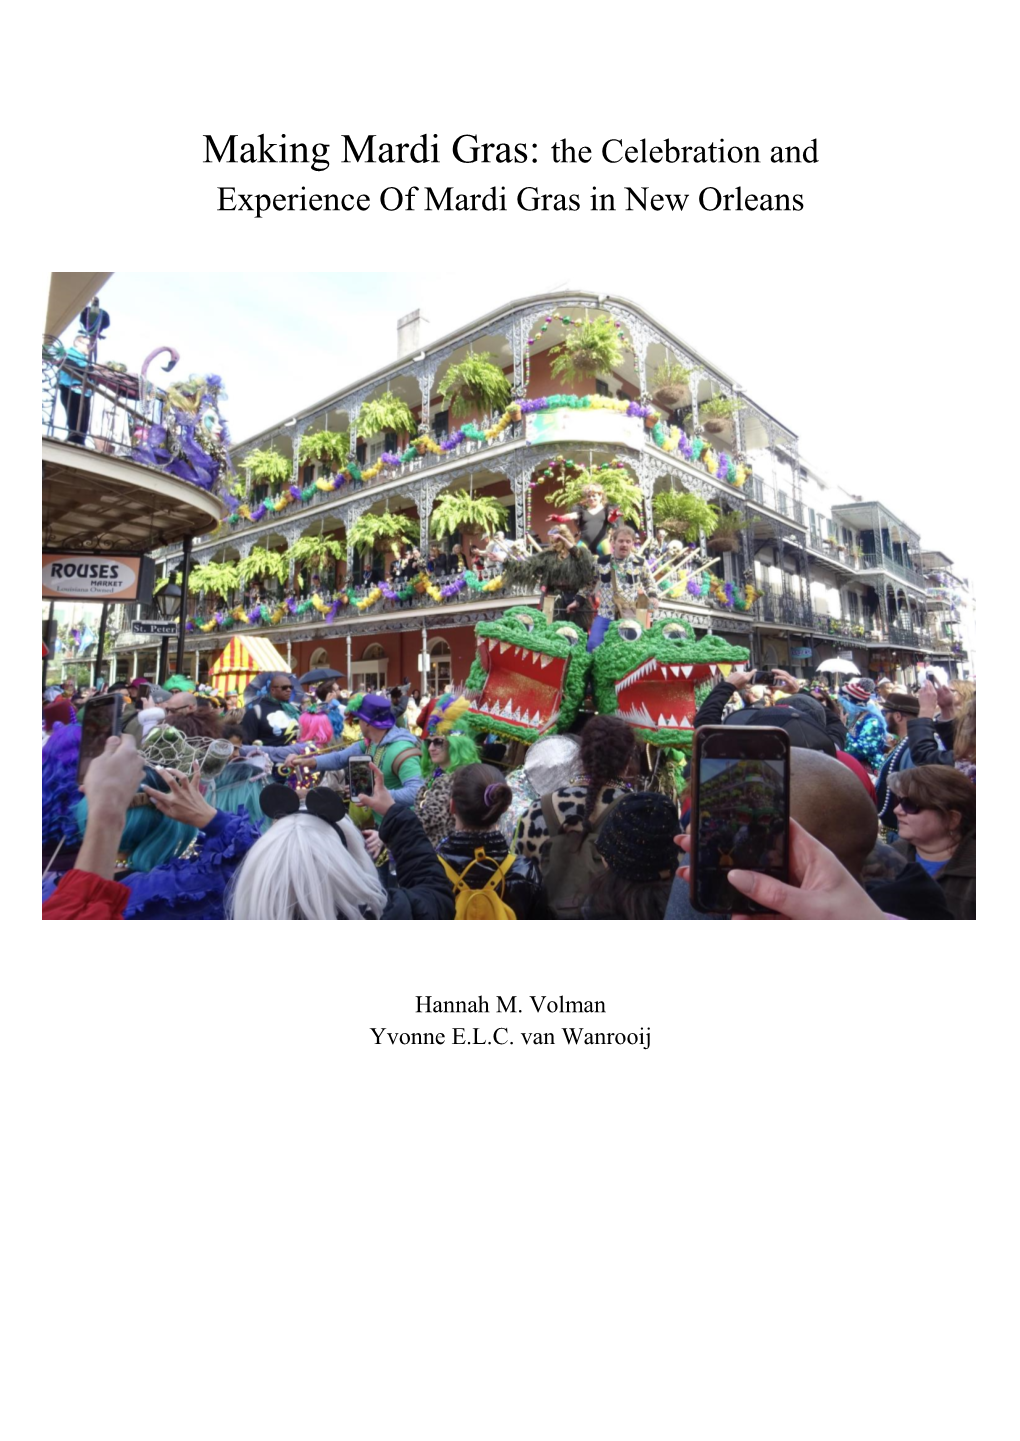 Making Mardi Gras: the Celebration and Experience of Mardi Gras in New Orleans